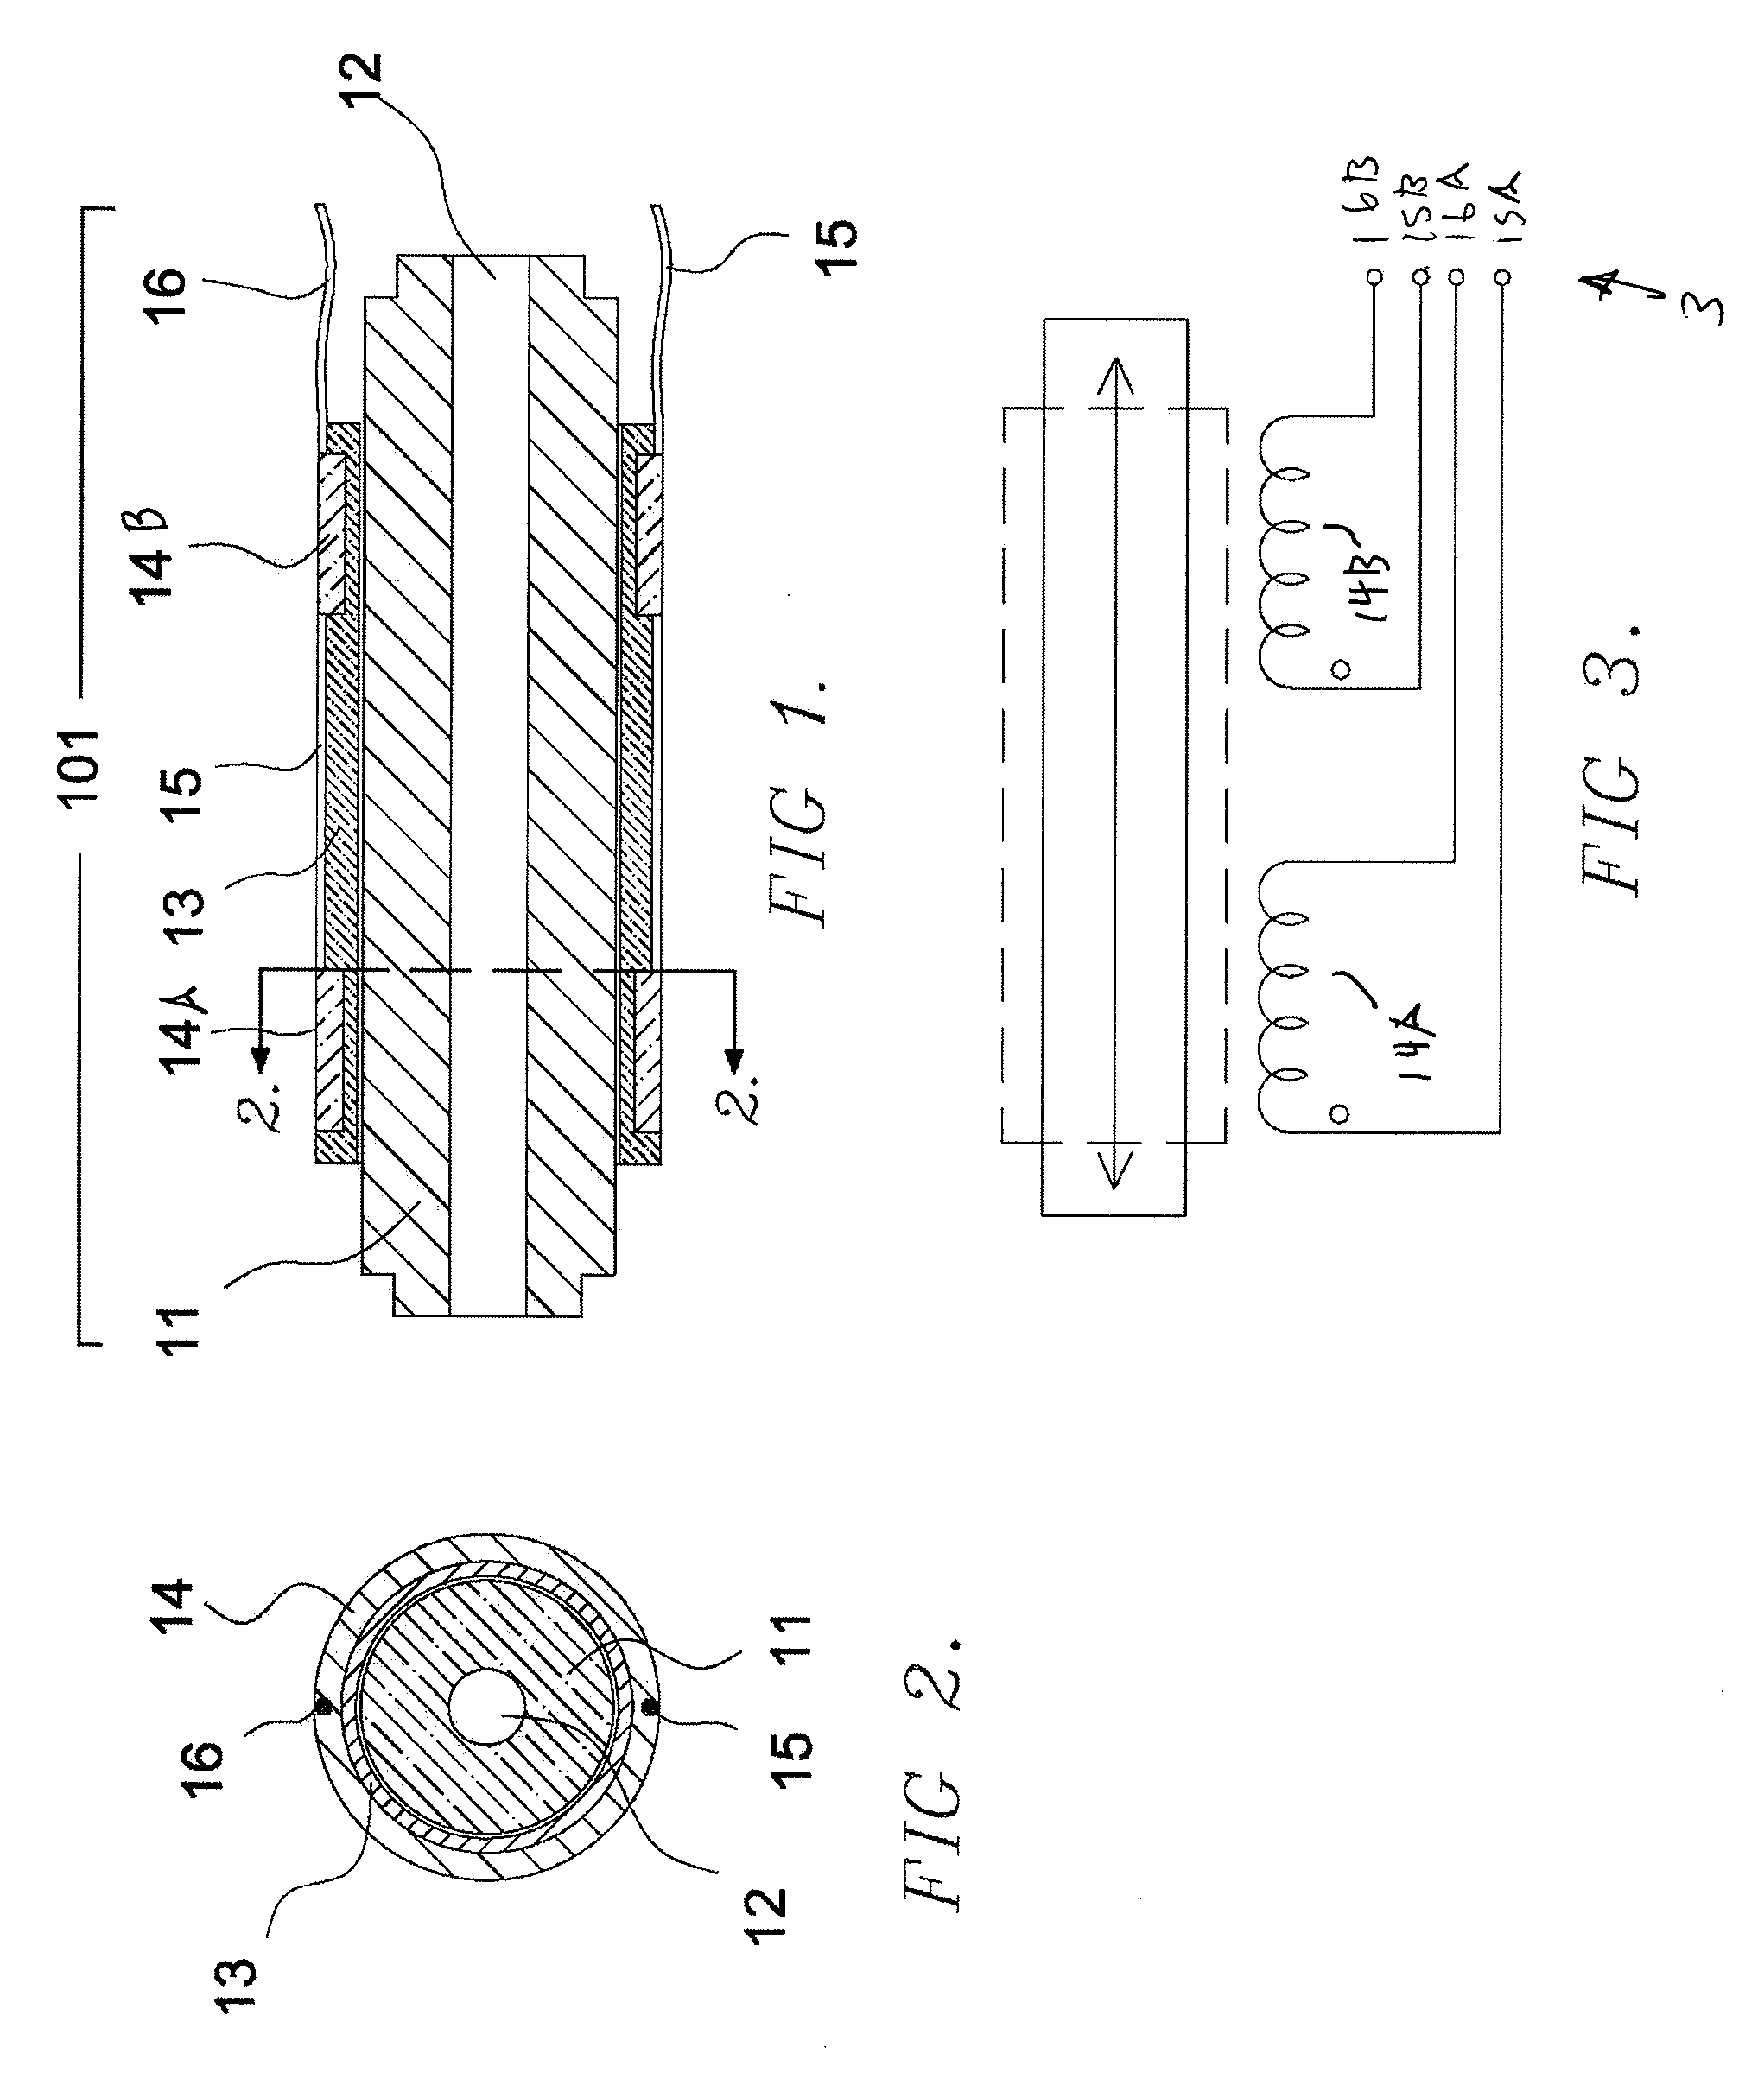 Magnetic linear actuator for deployable catheter tools